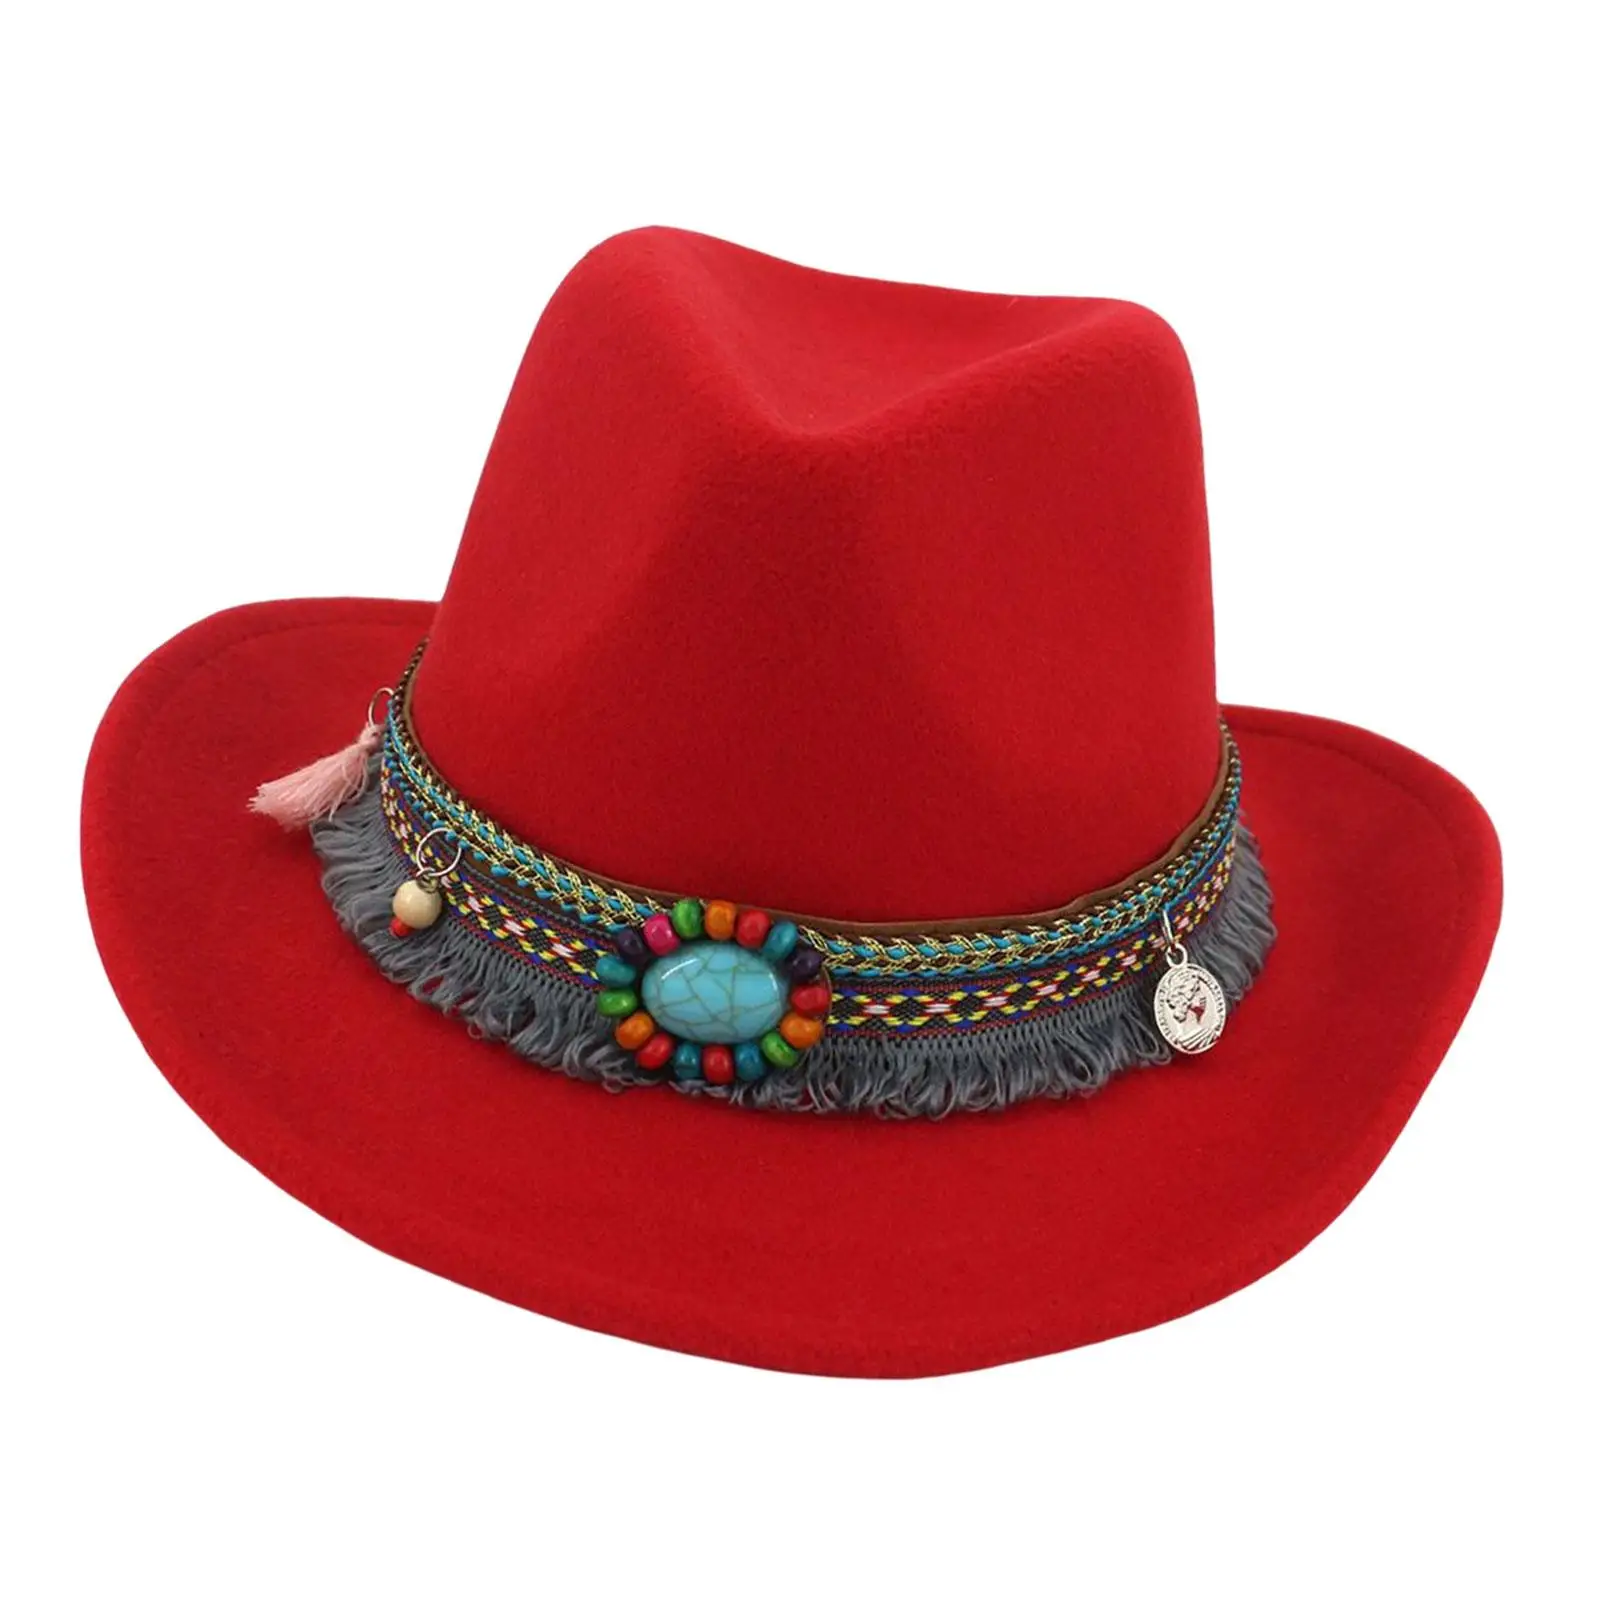 Fashion Women Men Cowboy Hat Fedoras Caps Accessories Panama Hat Cowgirl Hat Jazz Top Hat Costumes Sun Hat for Festival Holiday